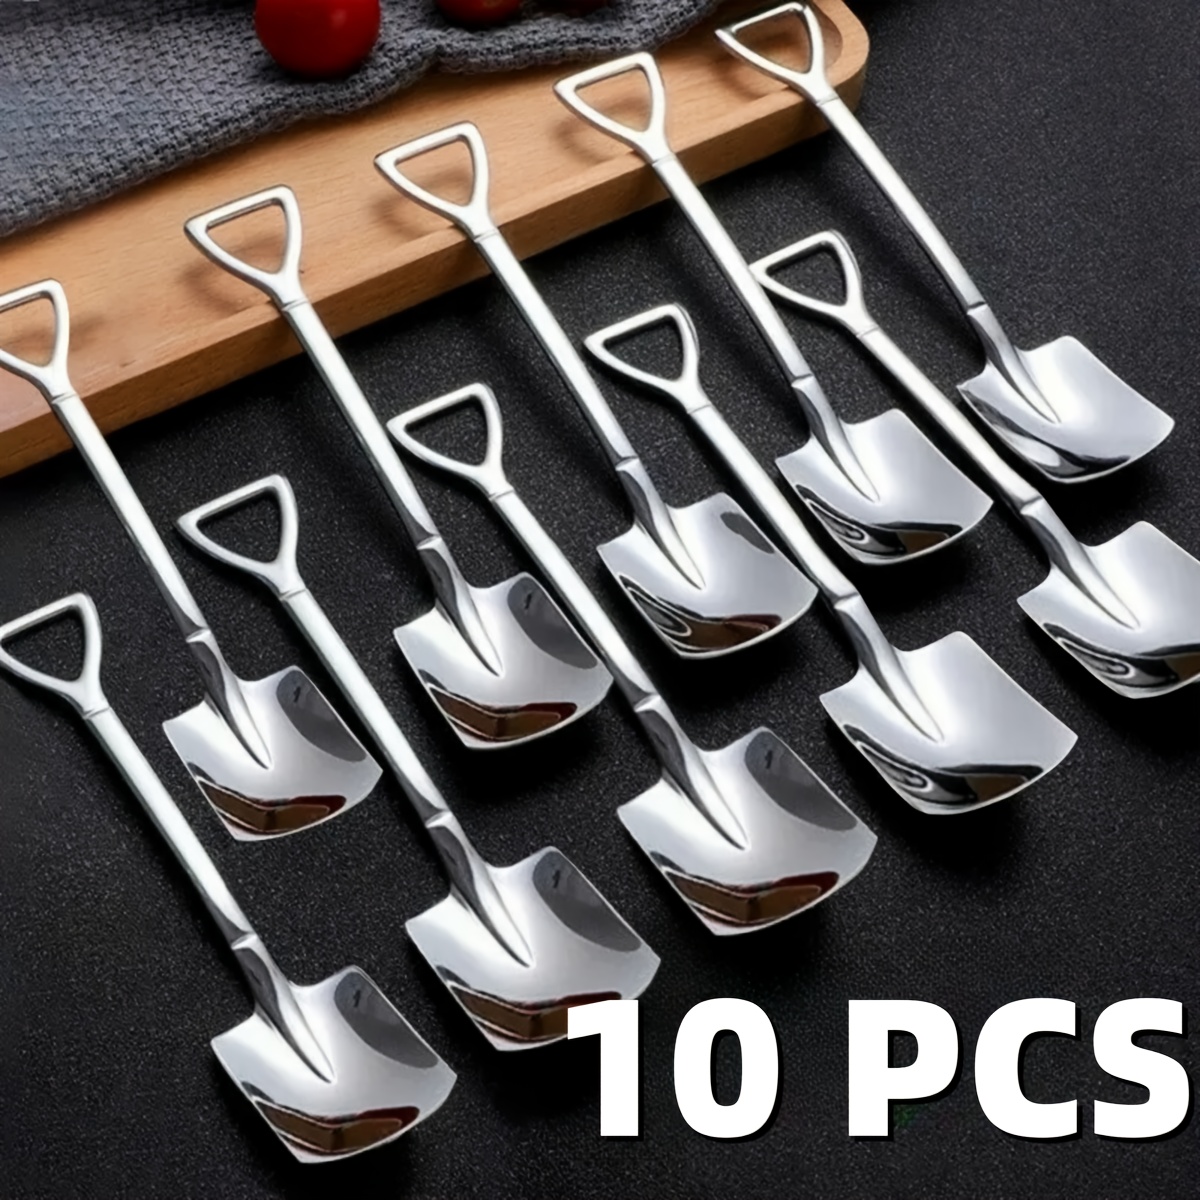 

10 Pcs Stainless Steel Portable Shovel Dessert Spoons - Adorable Watermelon Scoops For Fruit, Ice Cream, And Desserts - Perfect For Restaurants And Cafes